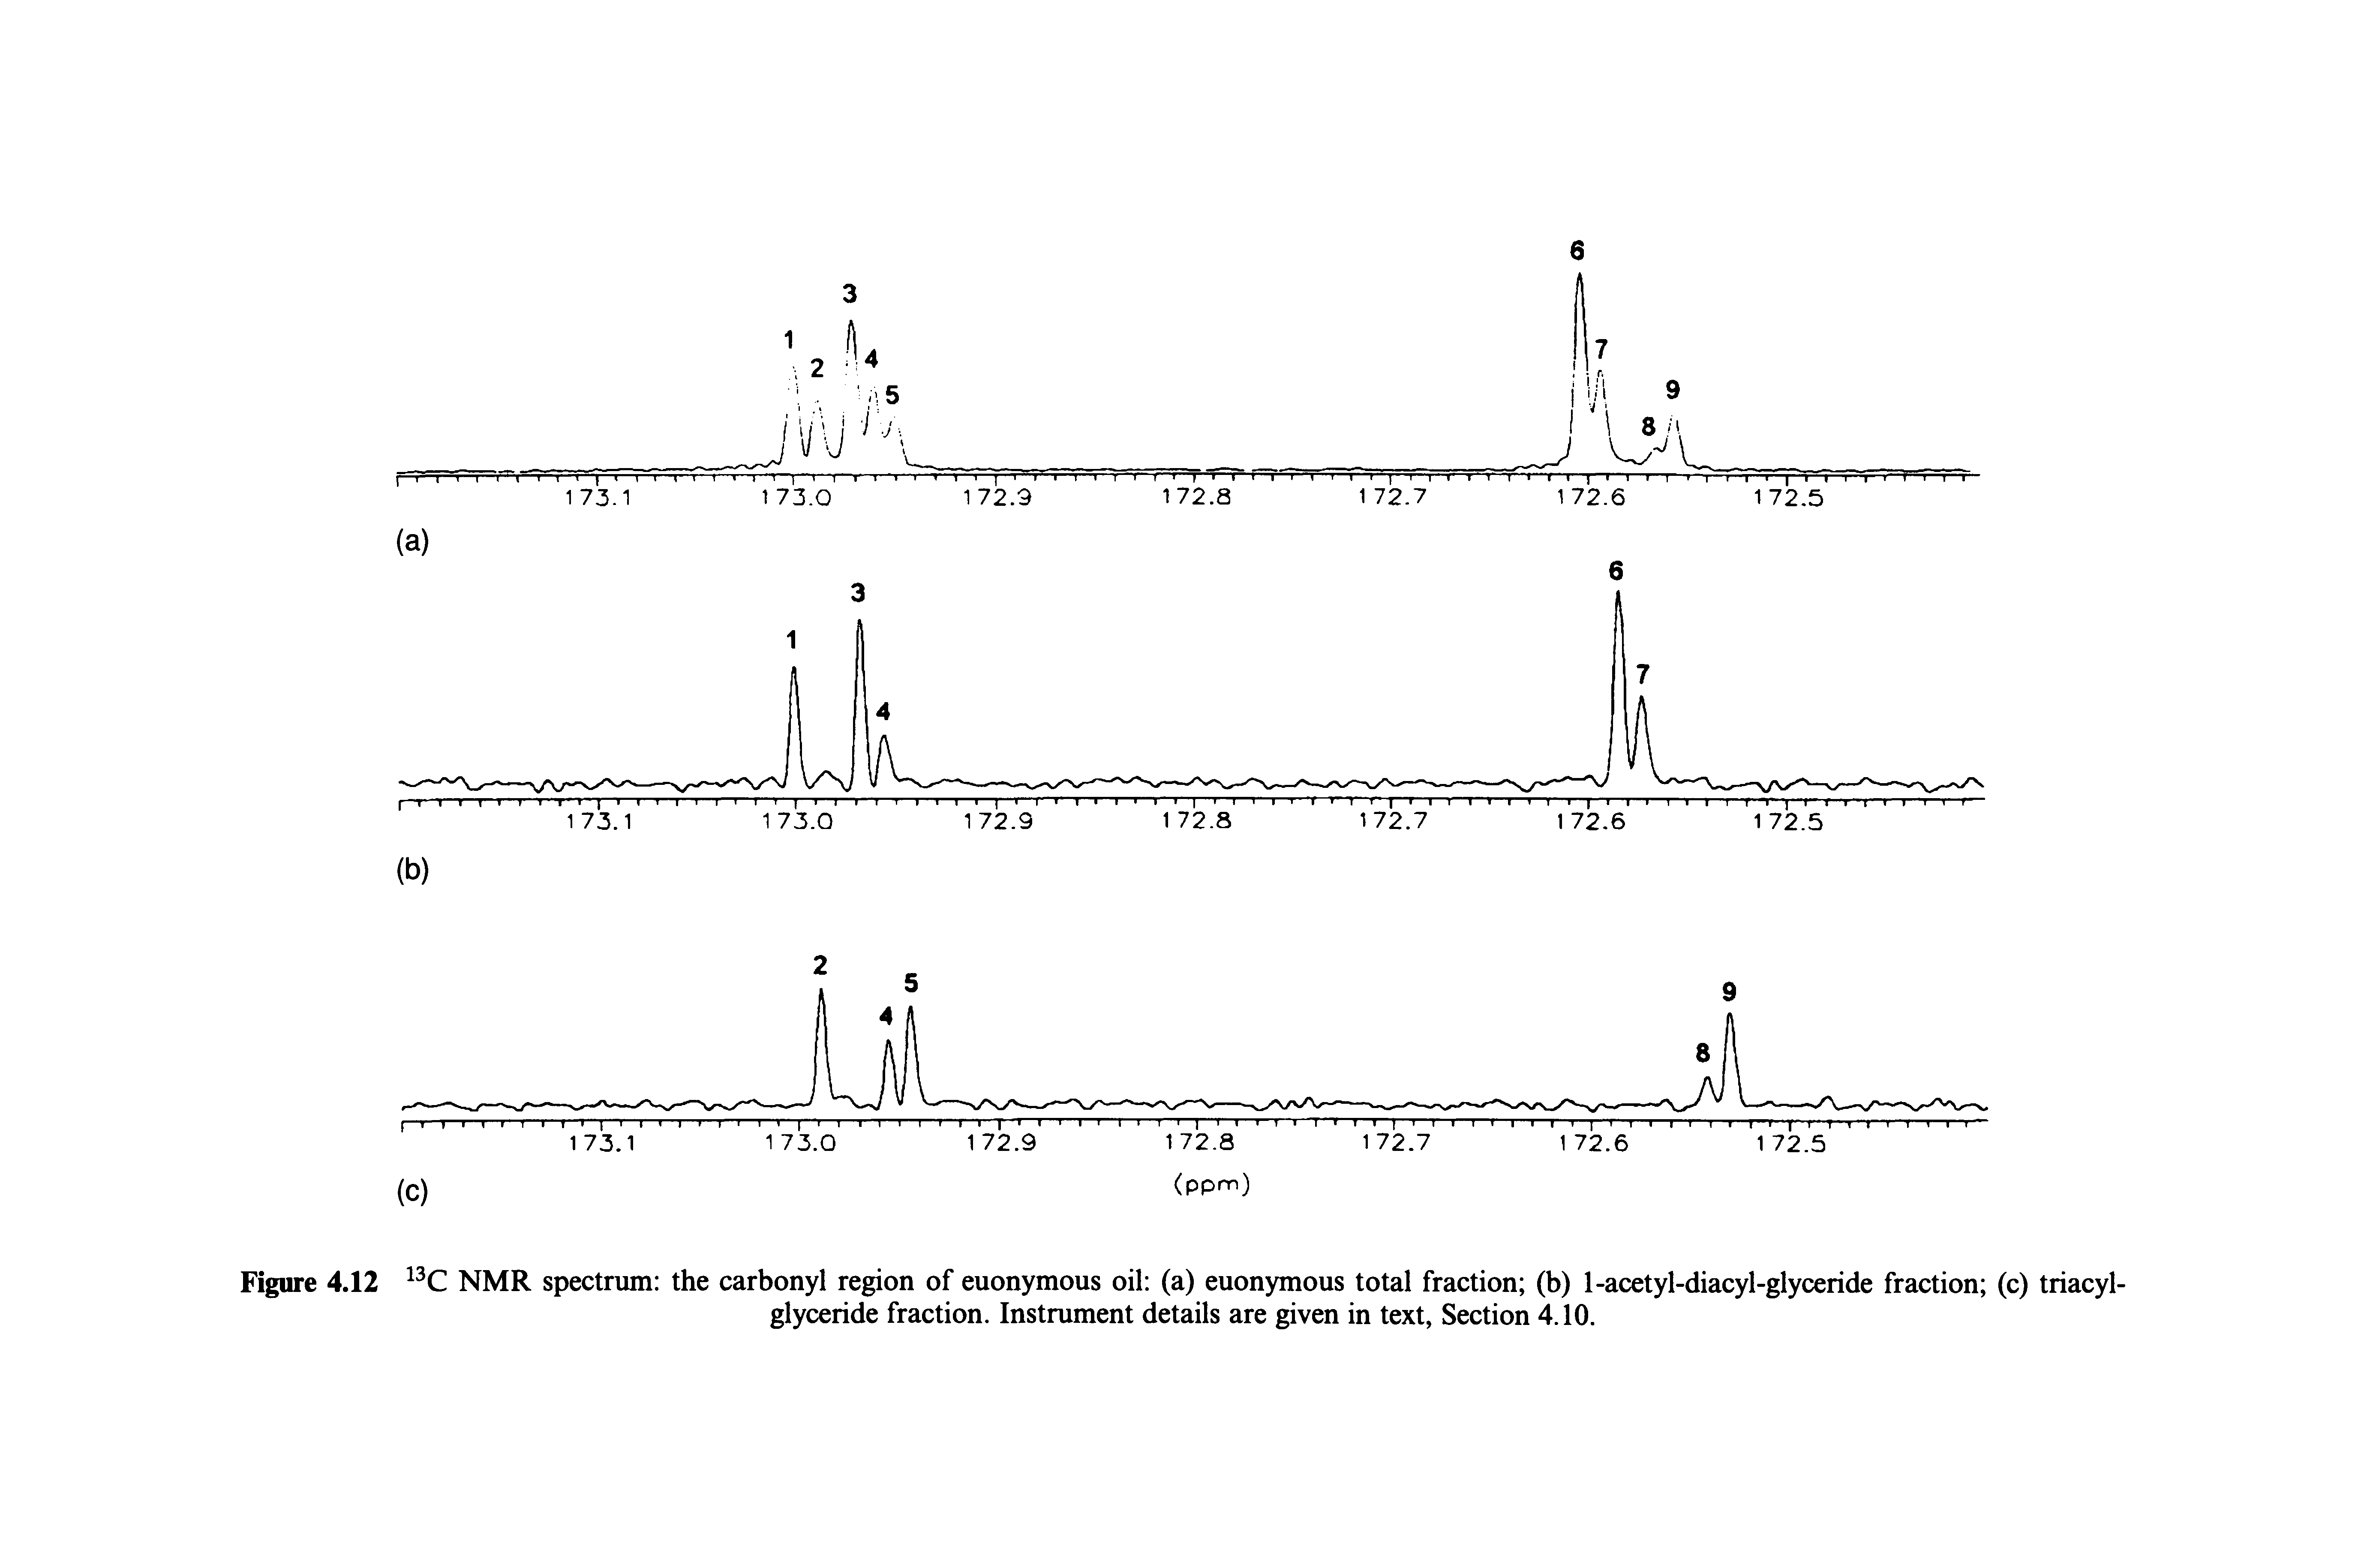 Figure 4.12 NMR spectrum the carbonyl region of euonymous oil (a) euonymous total fraction (b) 1-acetyl-diacyl-glyceride fraction (c) triacyl-...